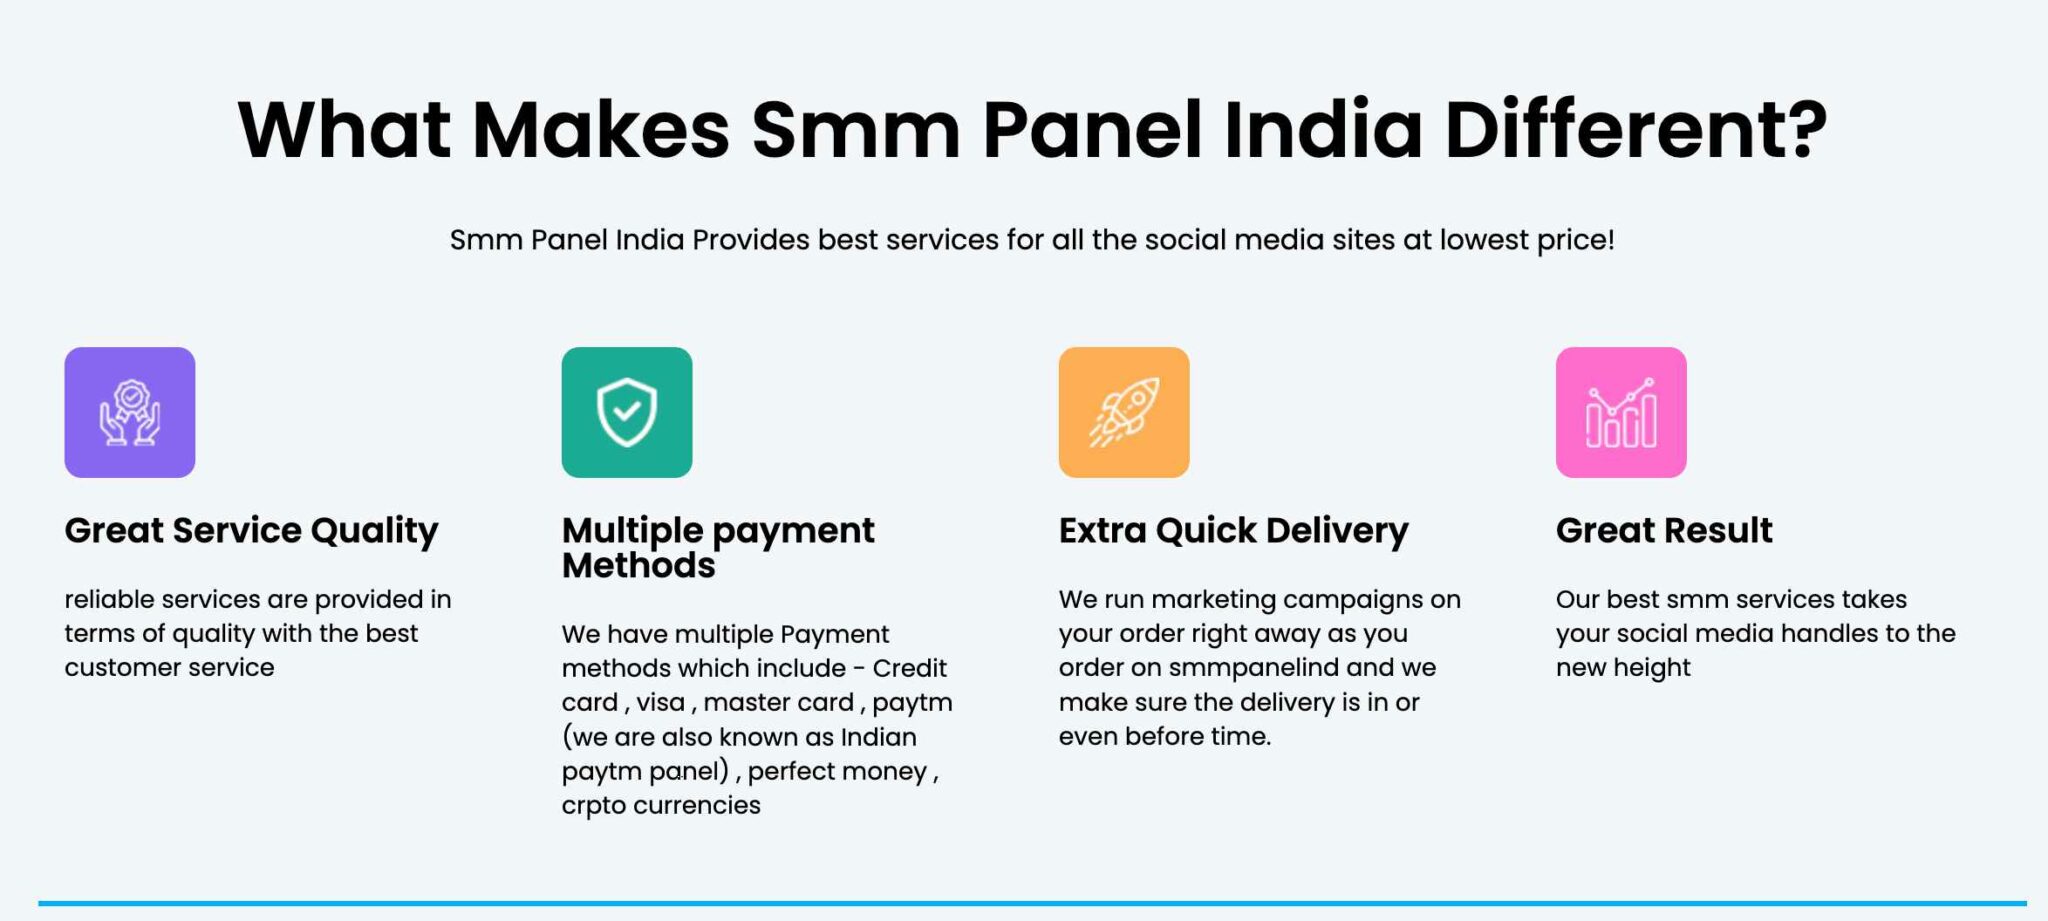 What makes SMM Panel India different?